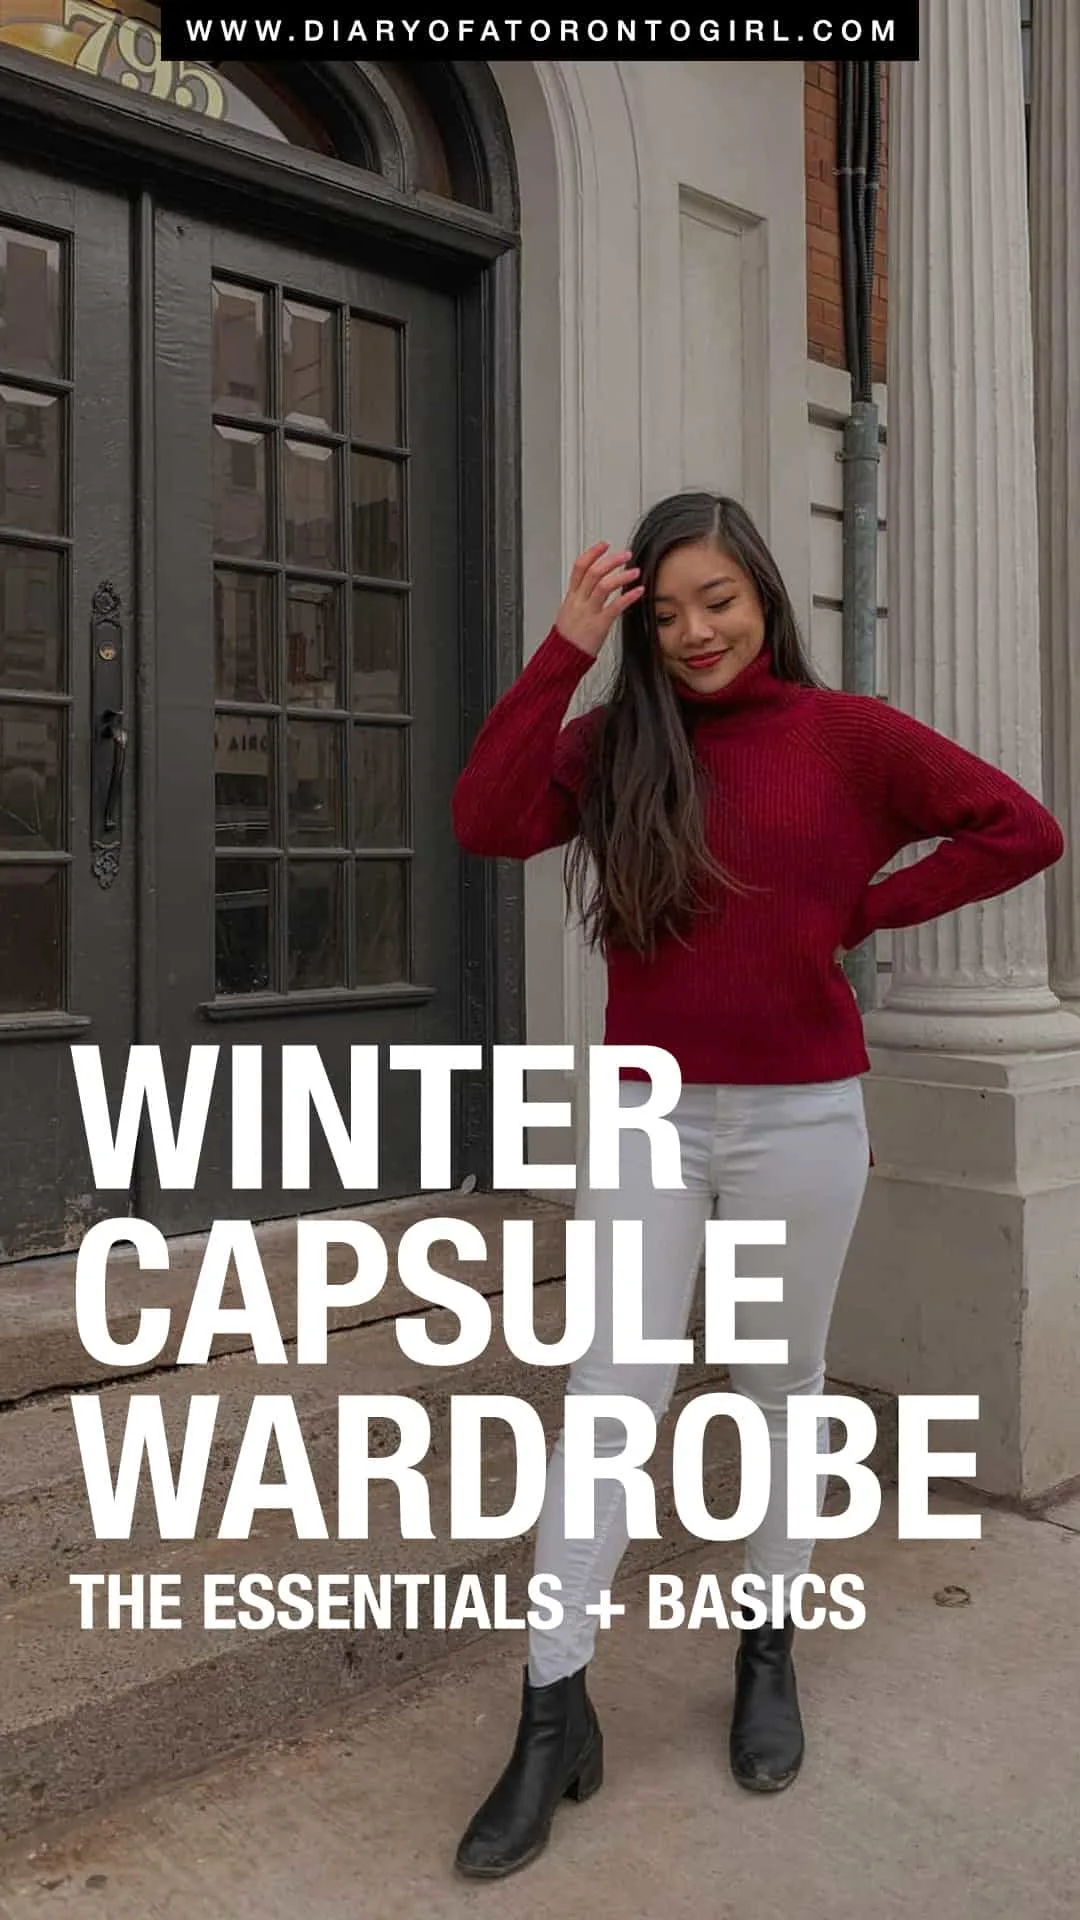 Winter capsule wardrobe essentials you absolutely must have in your closet, especially for Canadian weather. These capsule pieces are timeless for your wardrobe!